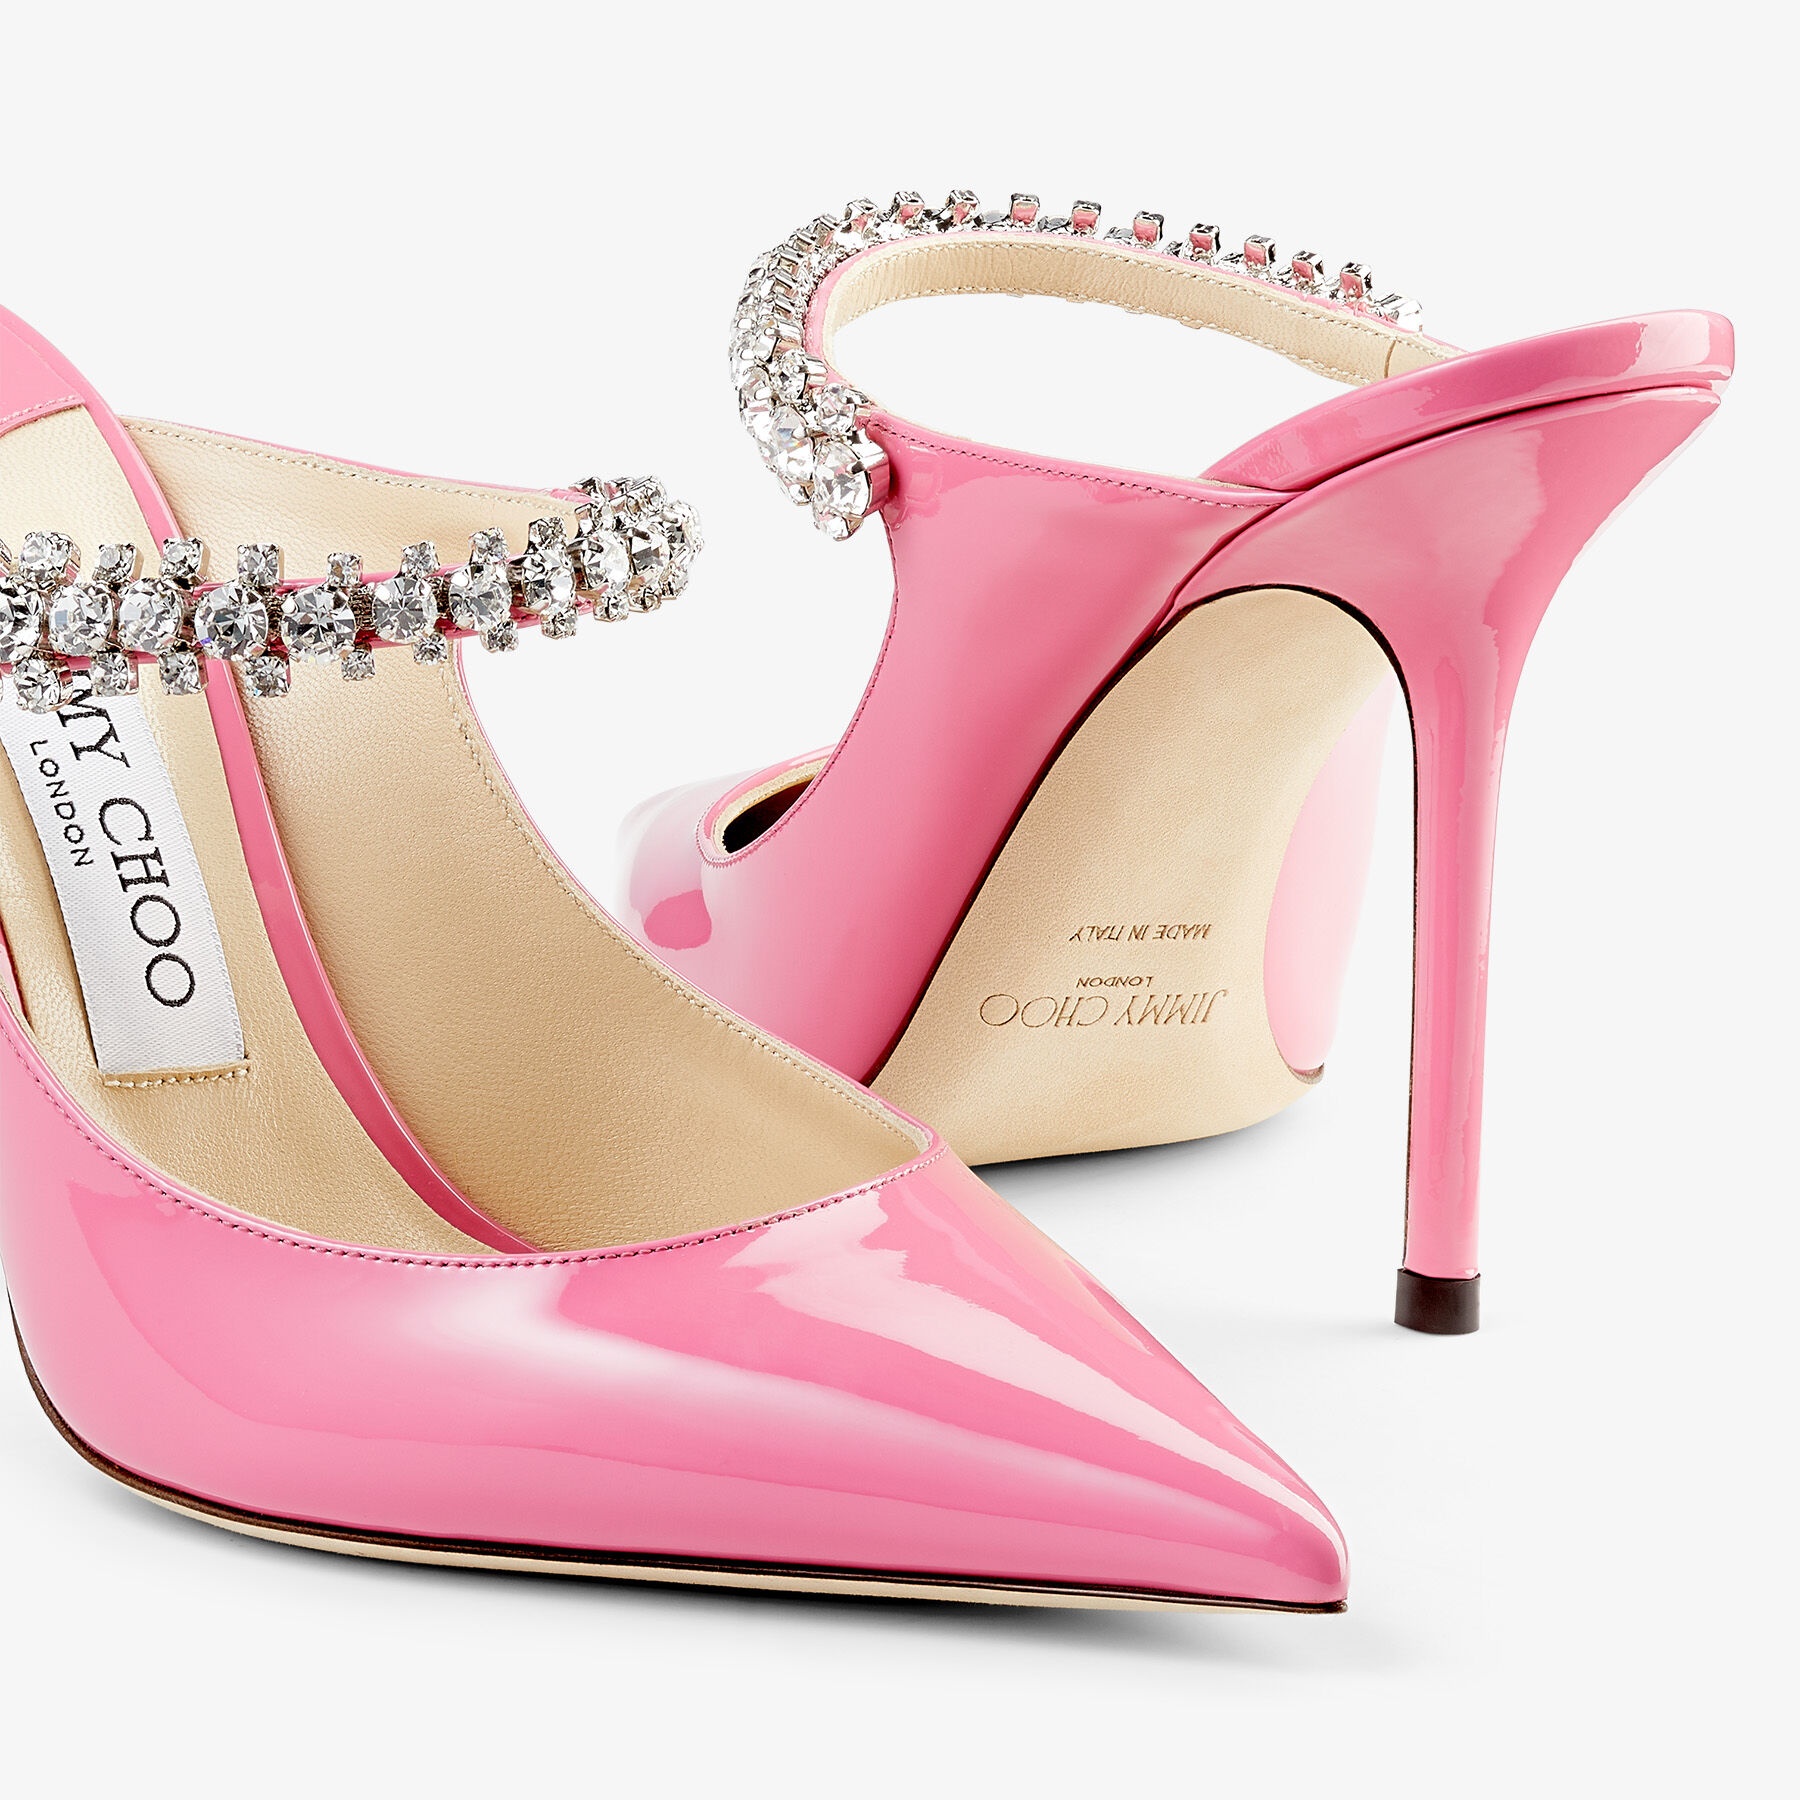 Bing 100
Candy Pink Patent Leather Pumps with Crystal Strap - 3